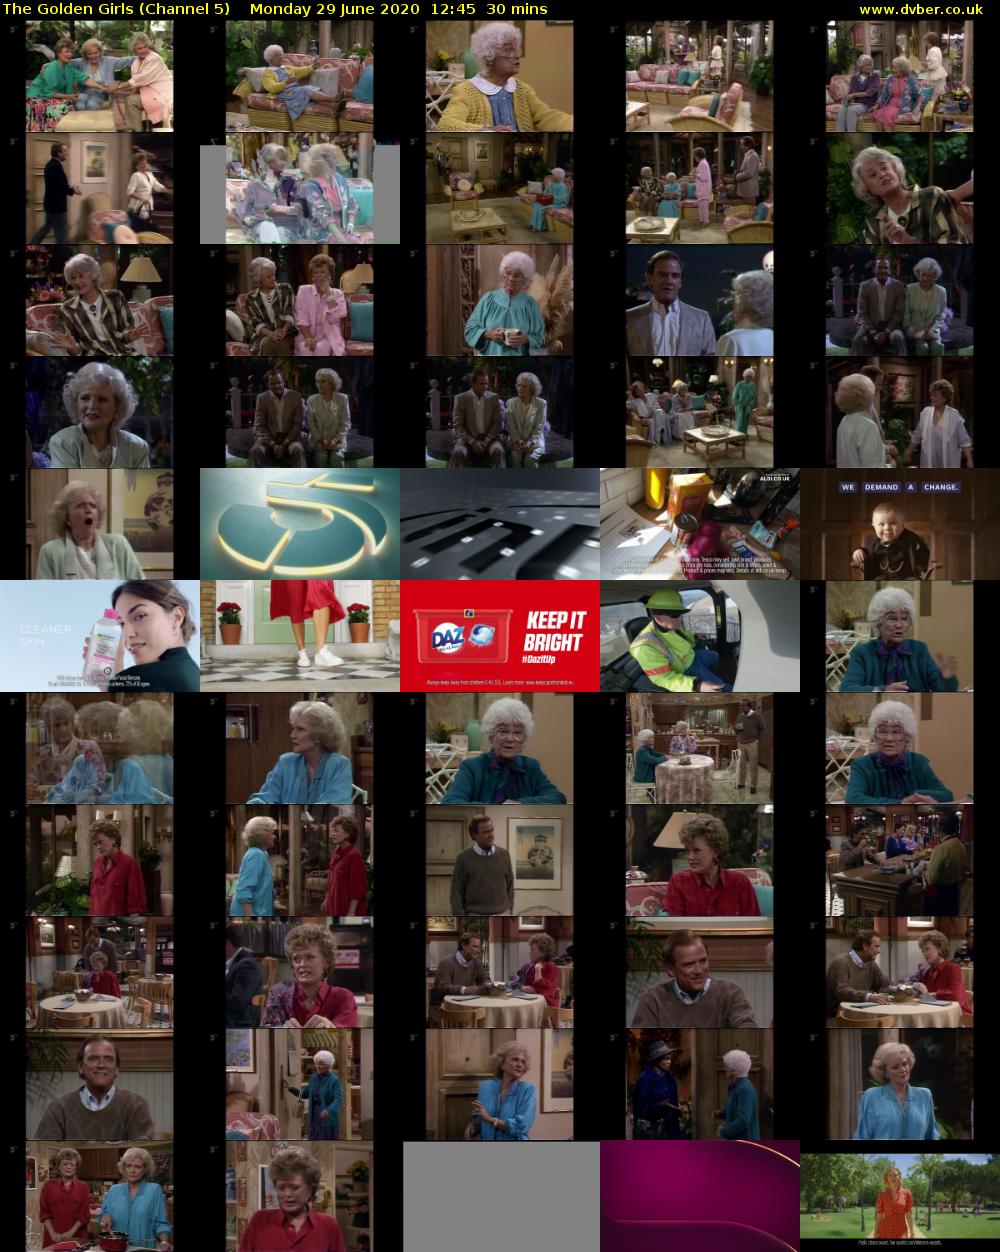 The Golden Girls (Channel 5) Monday 29 June 2020 12:45 - 13:15